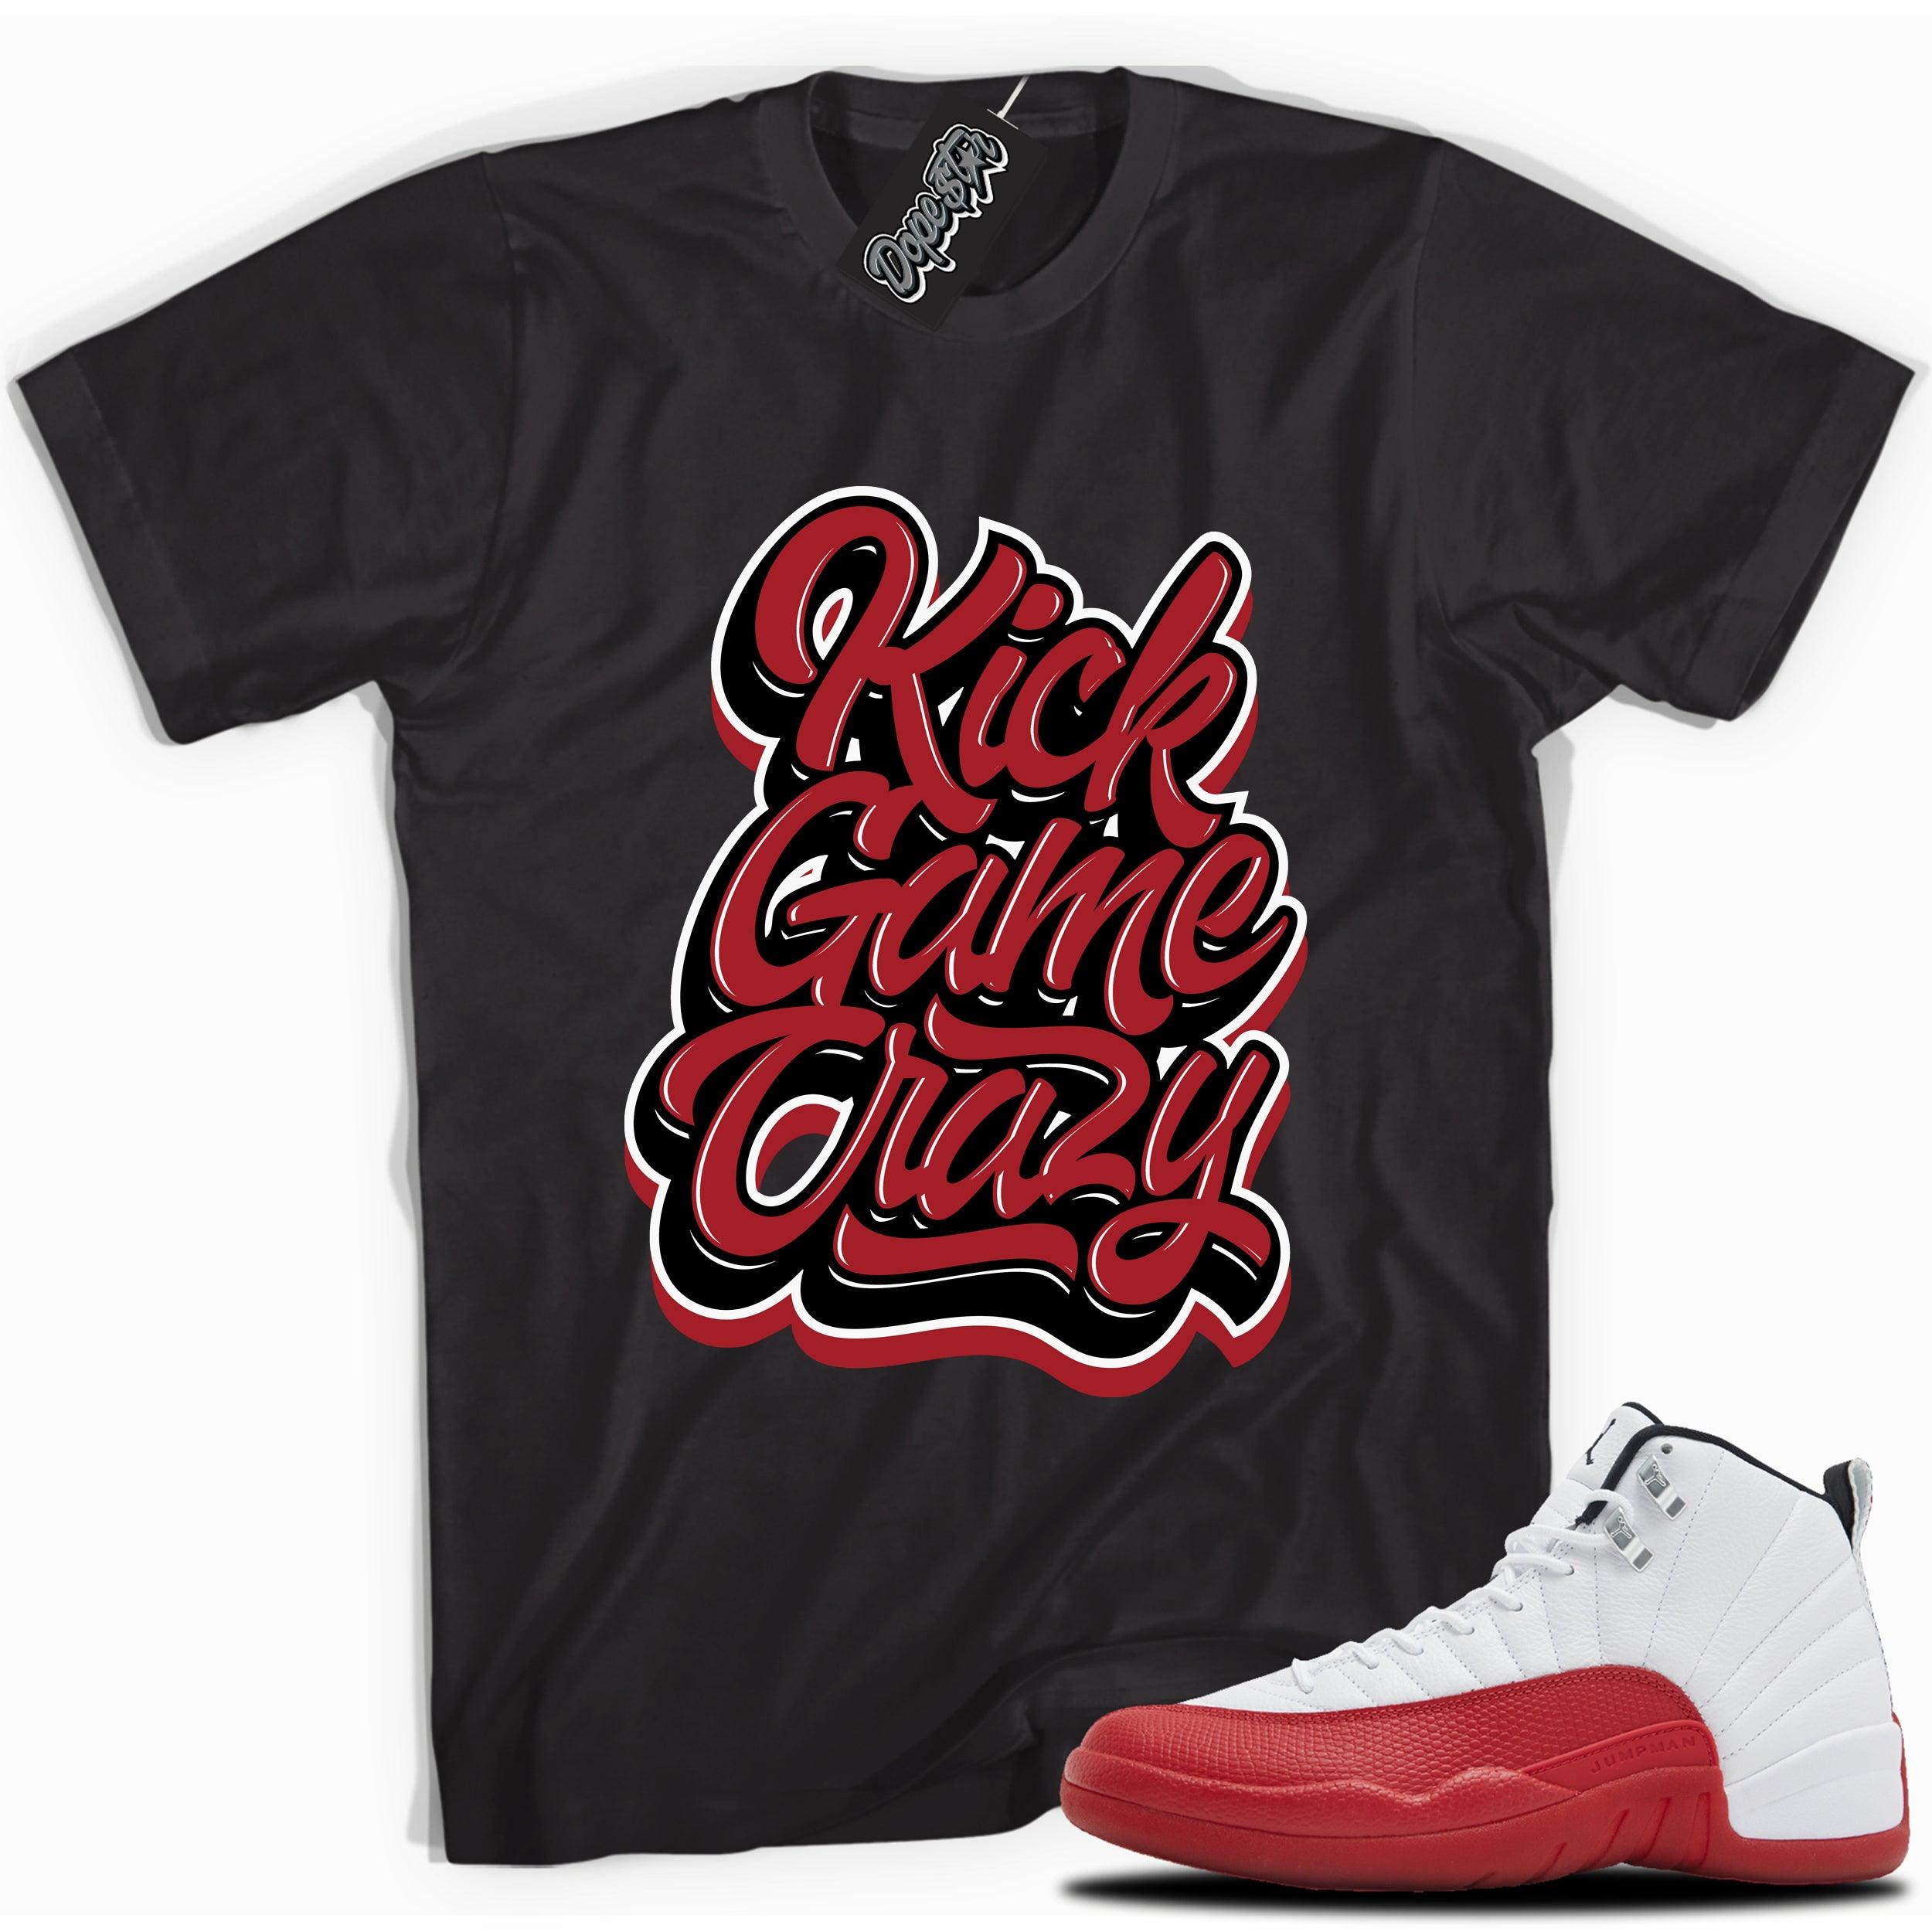 Cool Black graphic tee with “  Kick Game Crazy  ” print, that perfectly matches Air Jordan 12 Retro Cherry Red 2023 red and white sneakers 